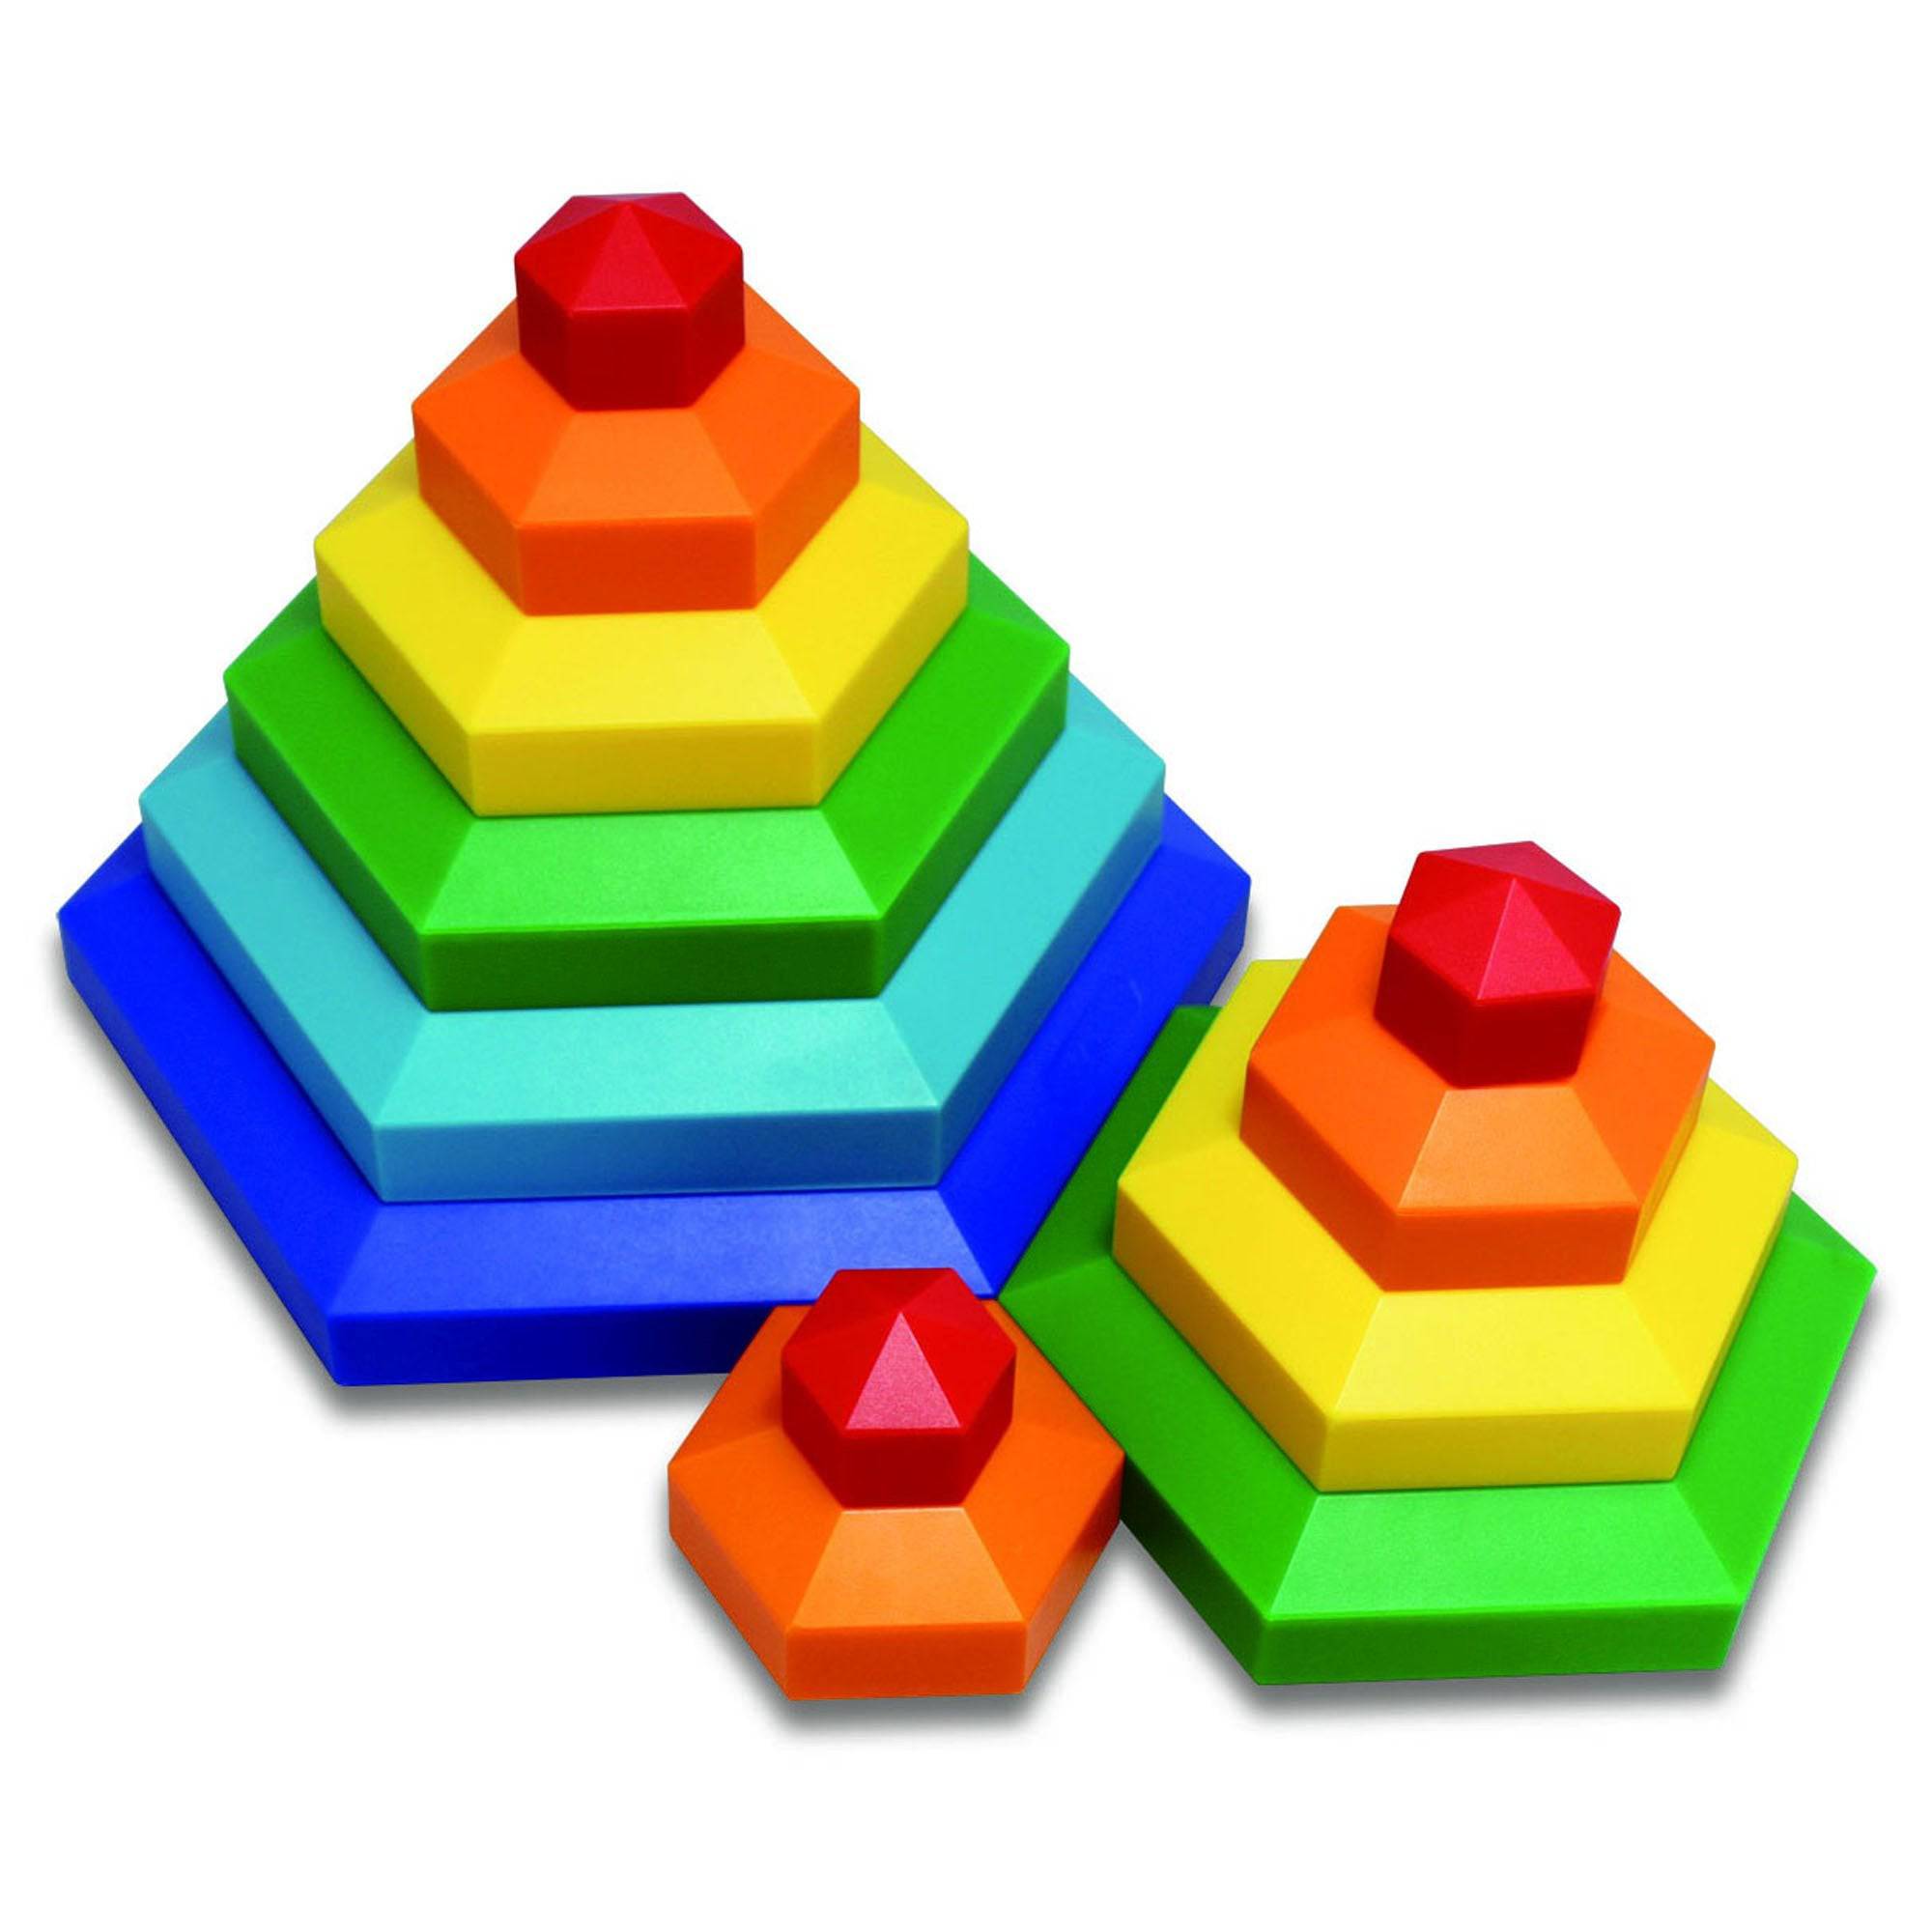 HEXACUS Stacking Design Construction Toy Set - Discovery Toys